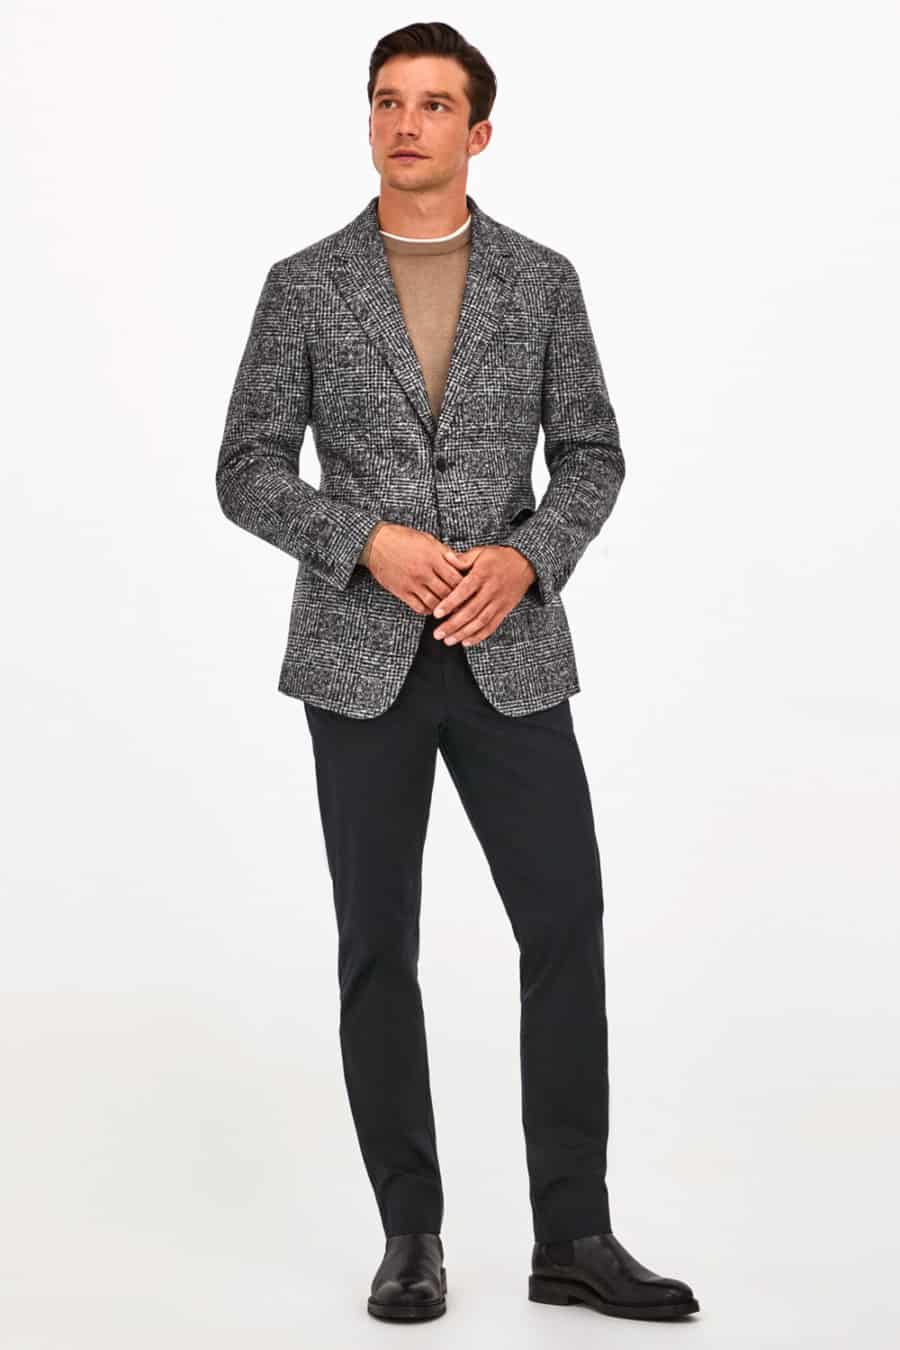 Men's black chinos, camel sweater, grey Prince of Wales check blazer, black Chelsea boots outfit